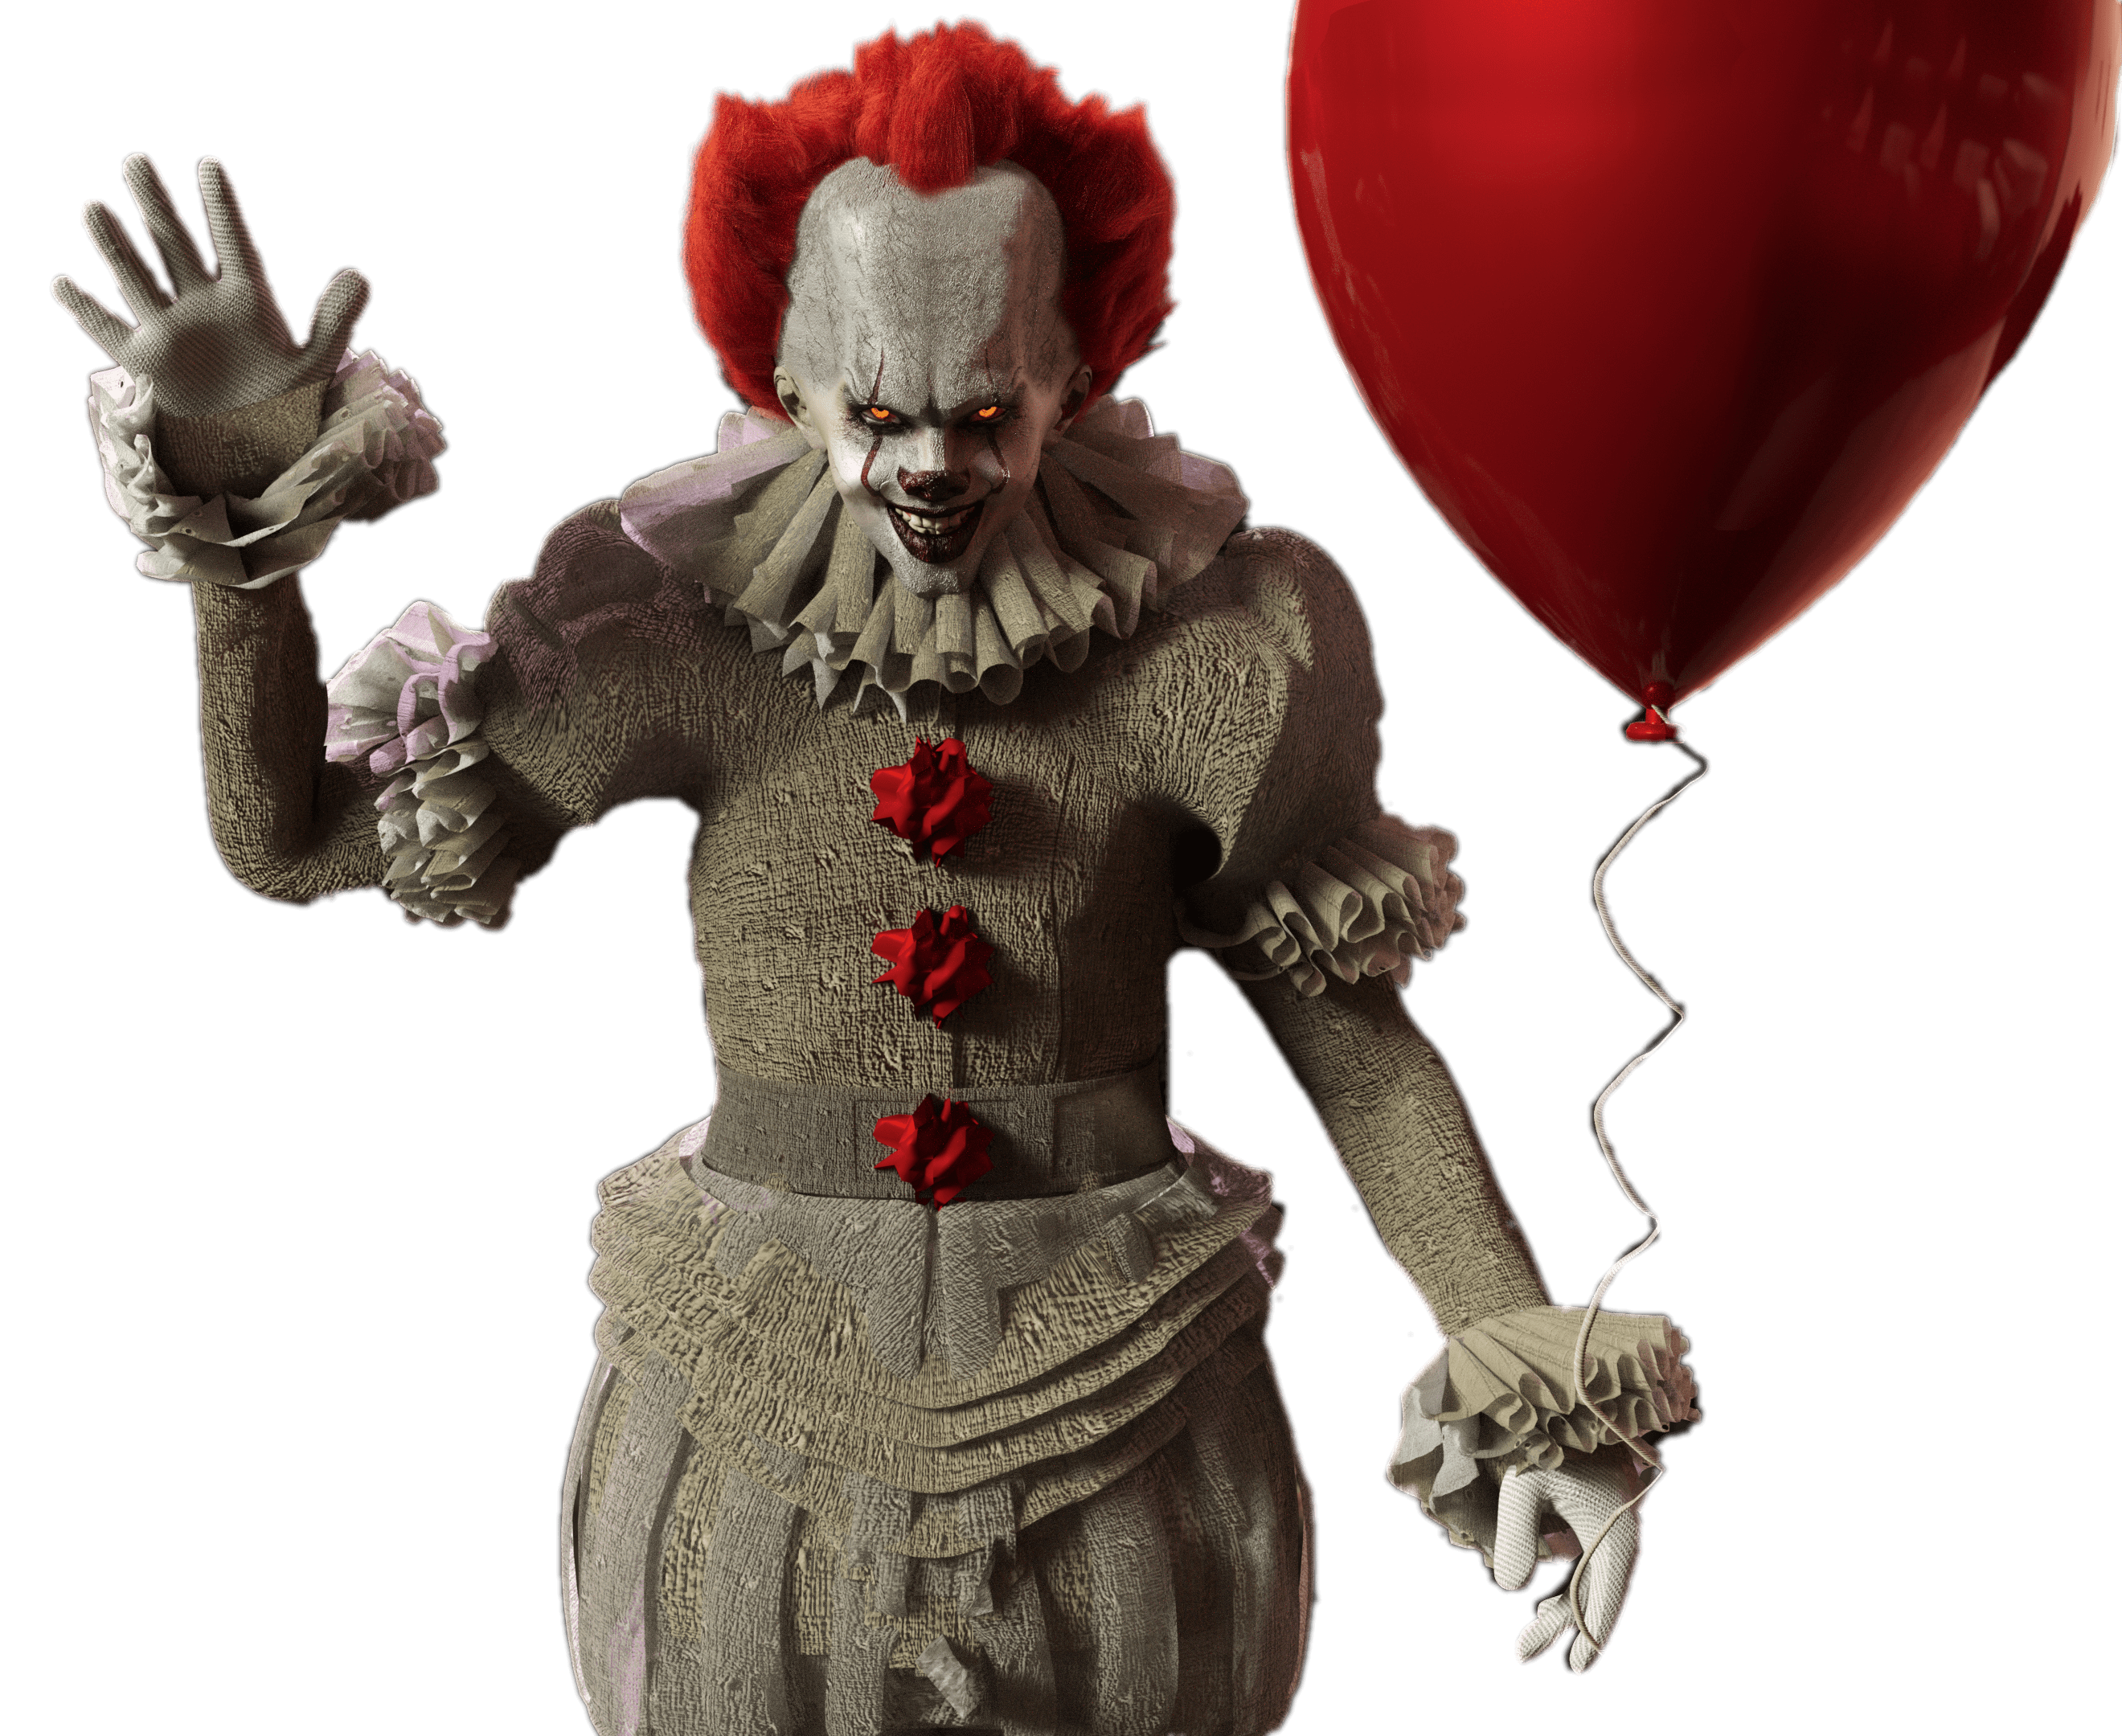 clipart balloon pennywise